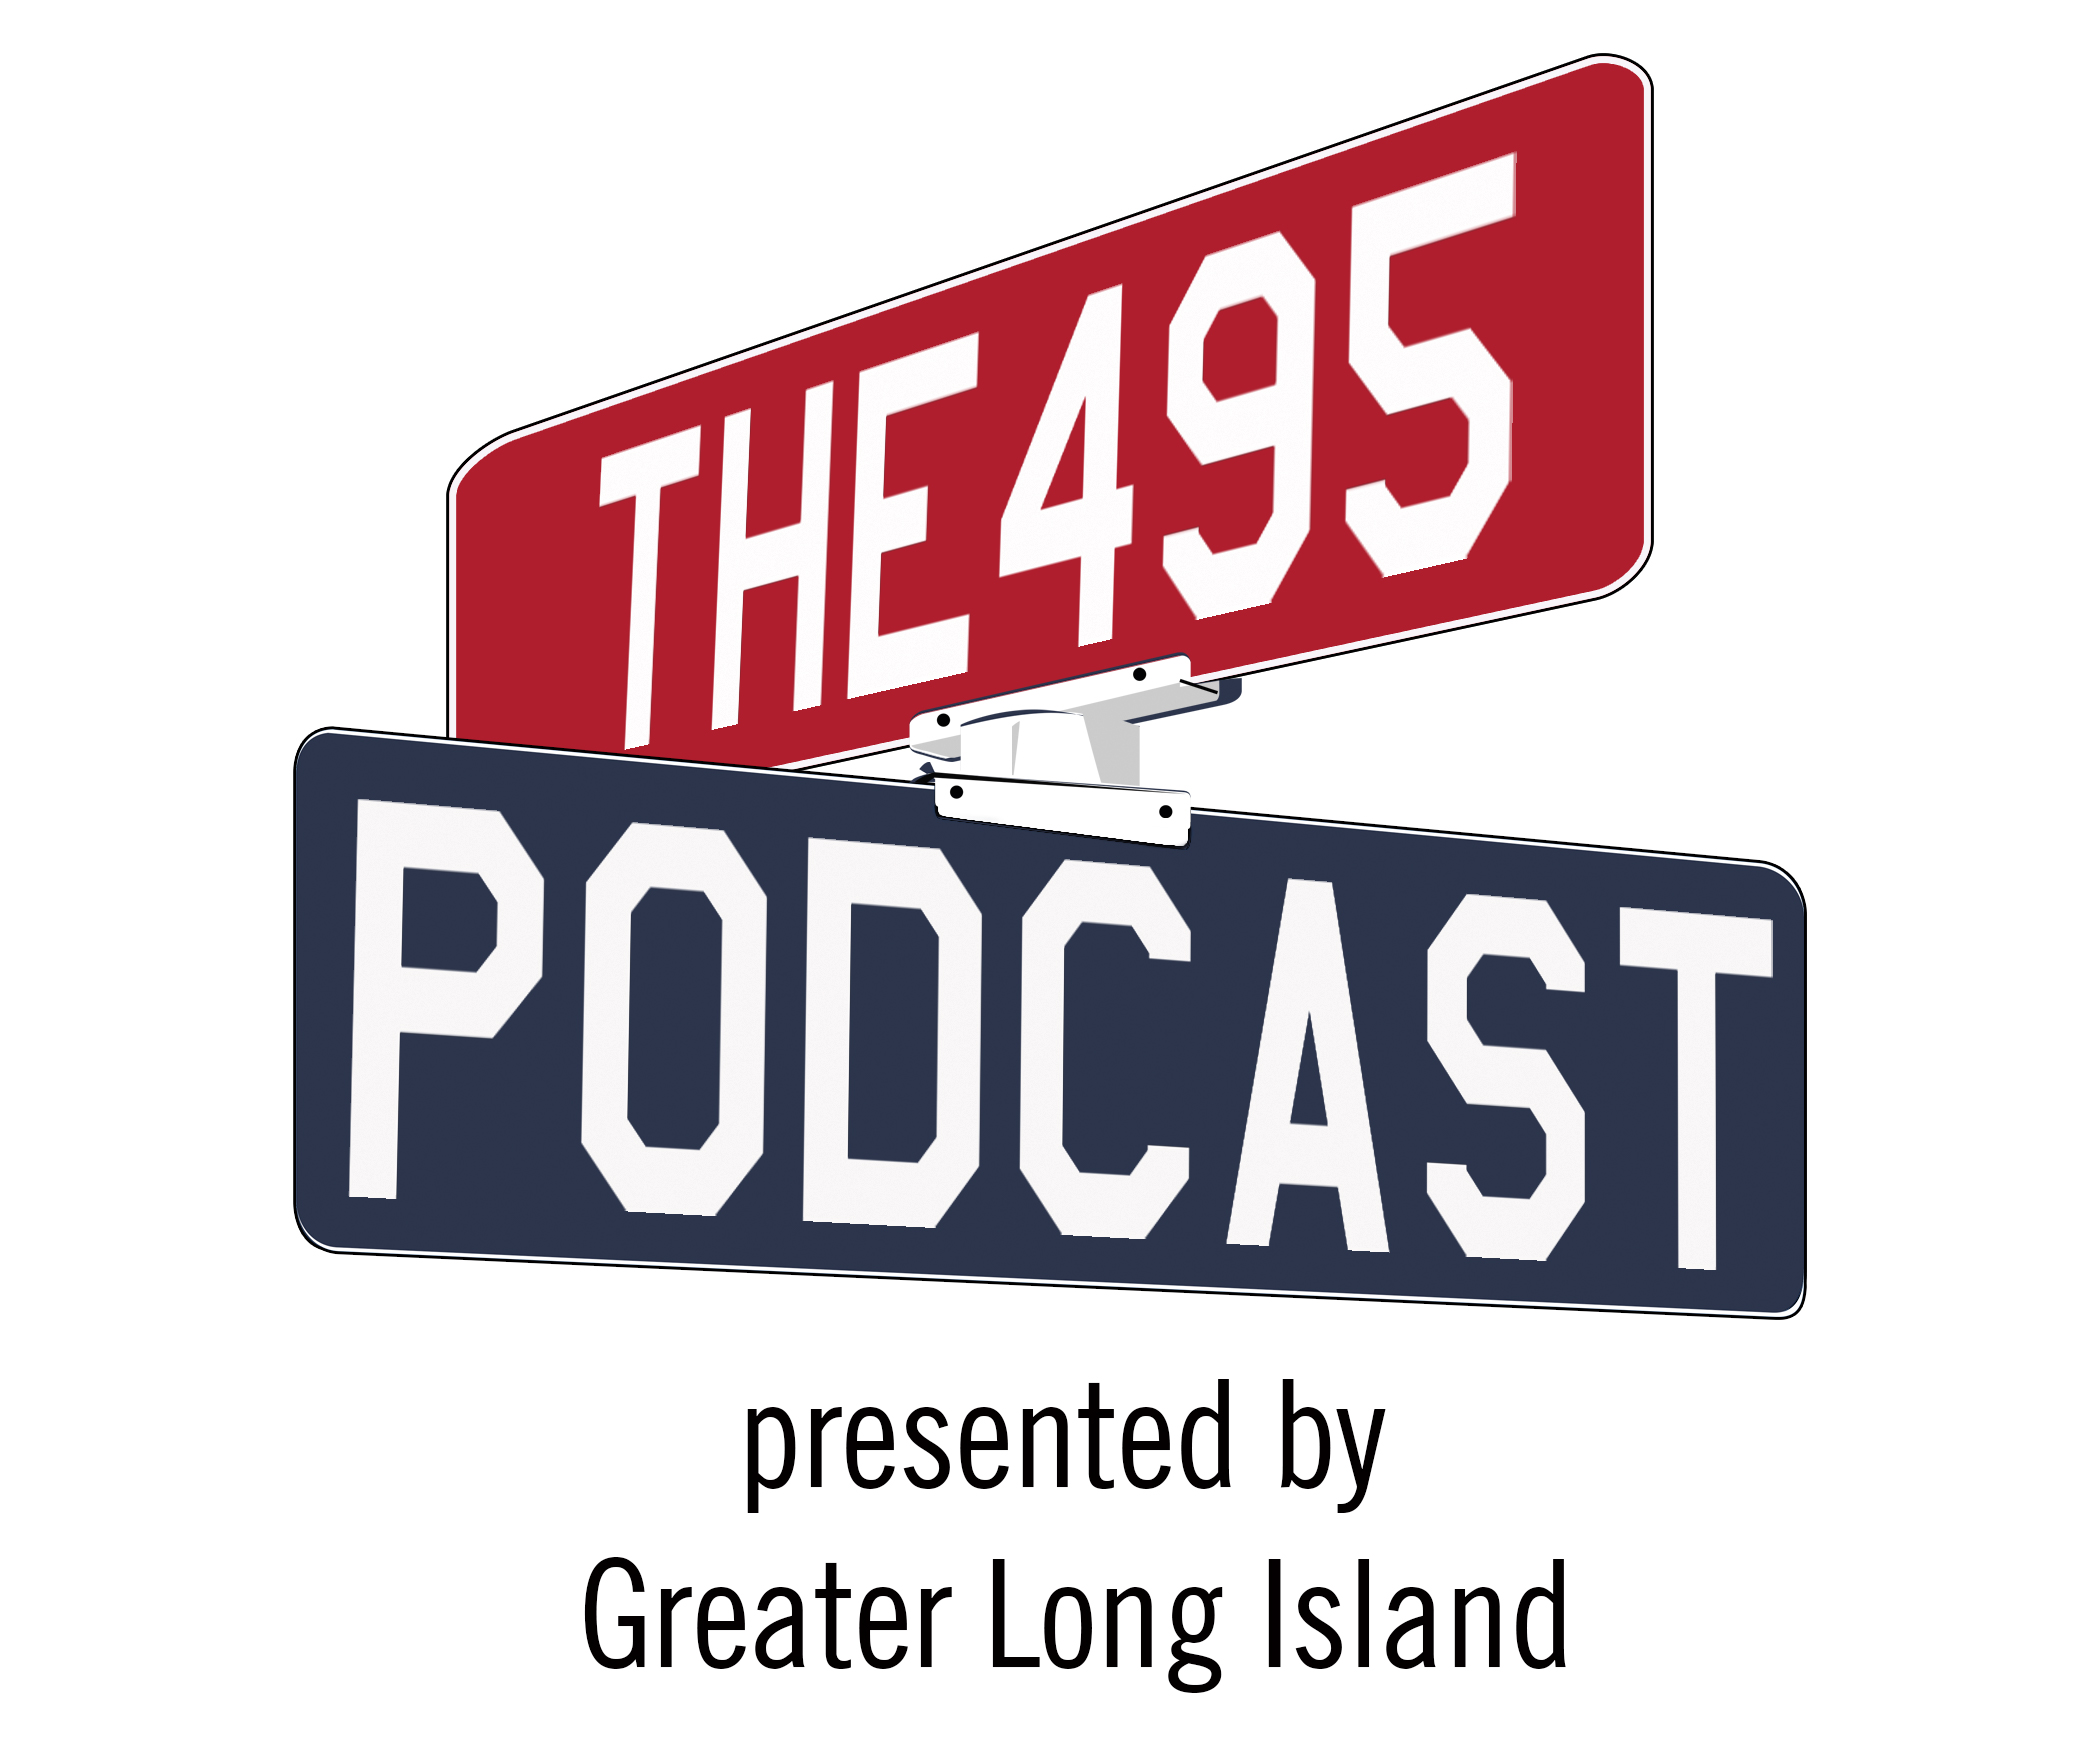 The 495 Podcast